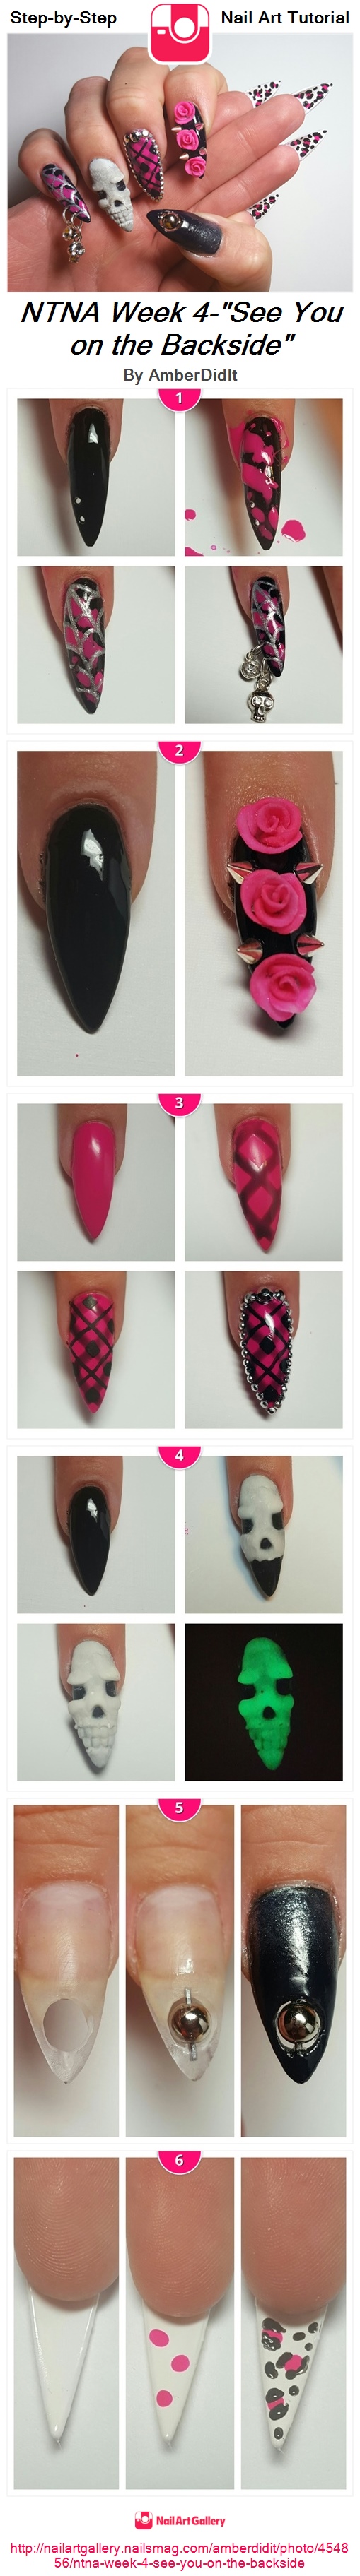 NTNA Week 4-"See You on the Backside" - Nail Art Gallery